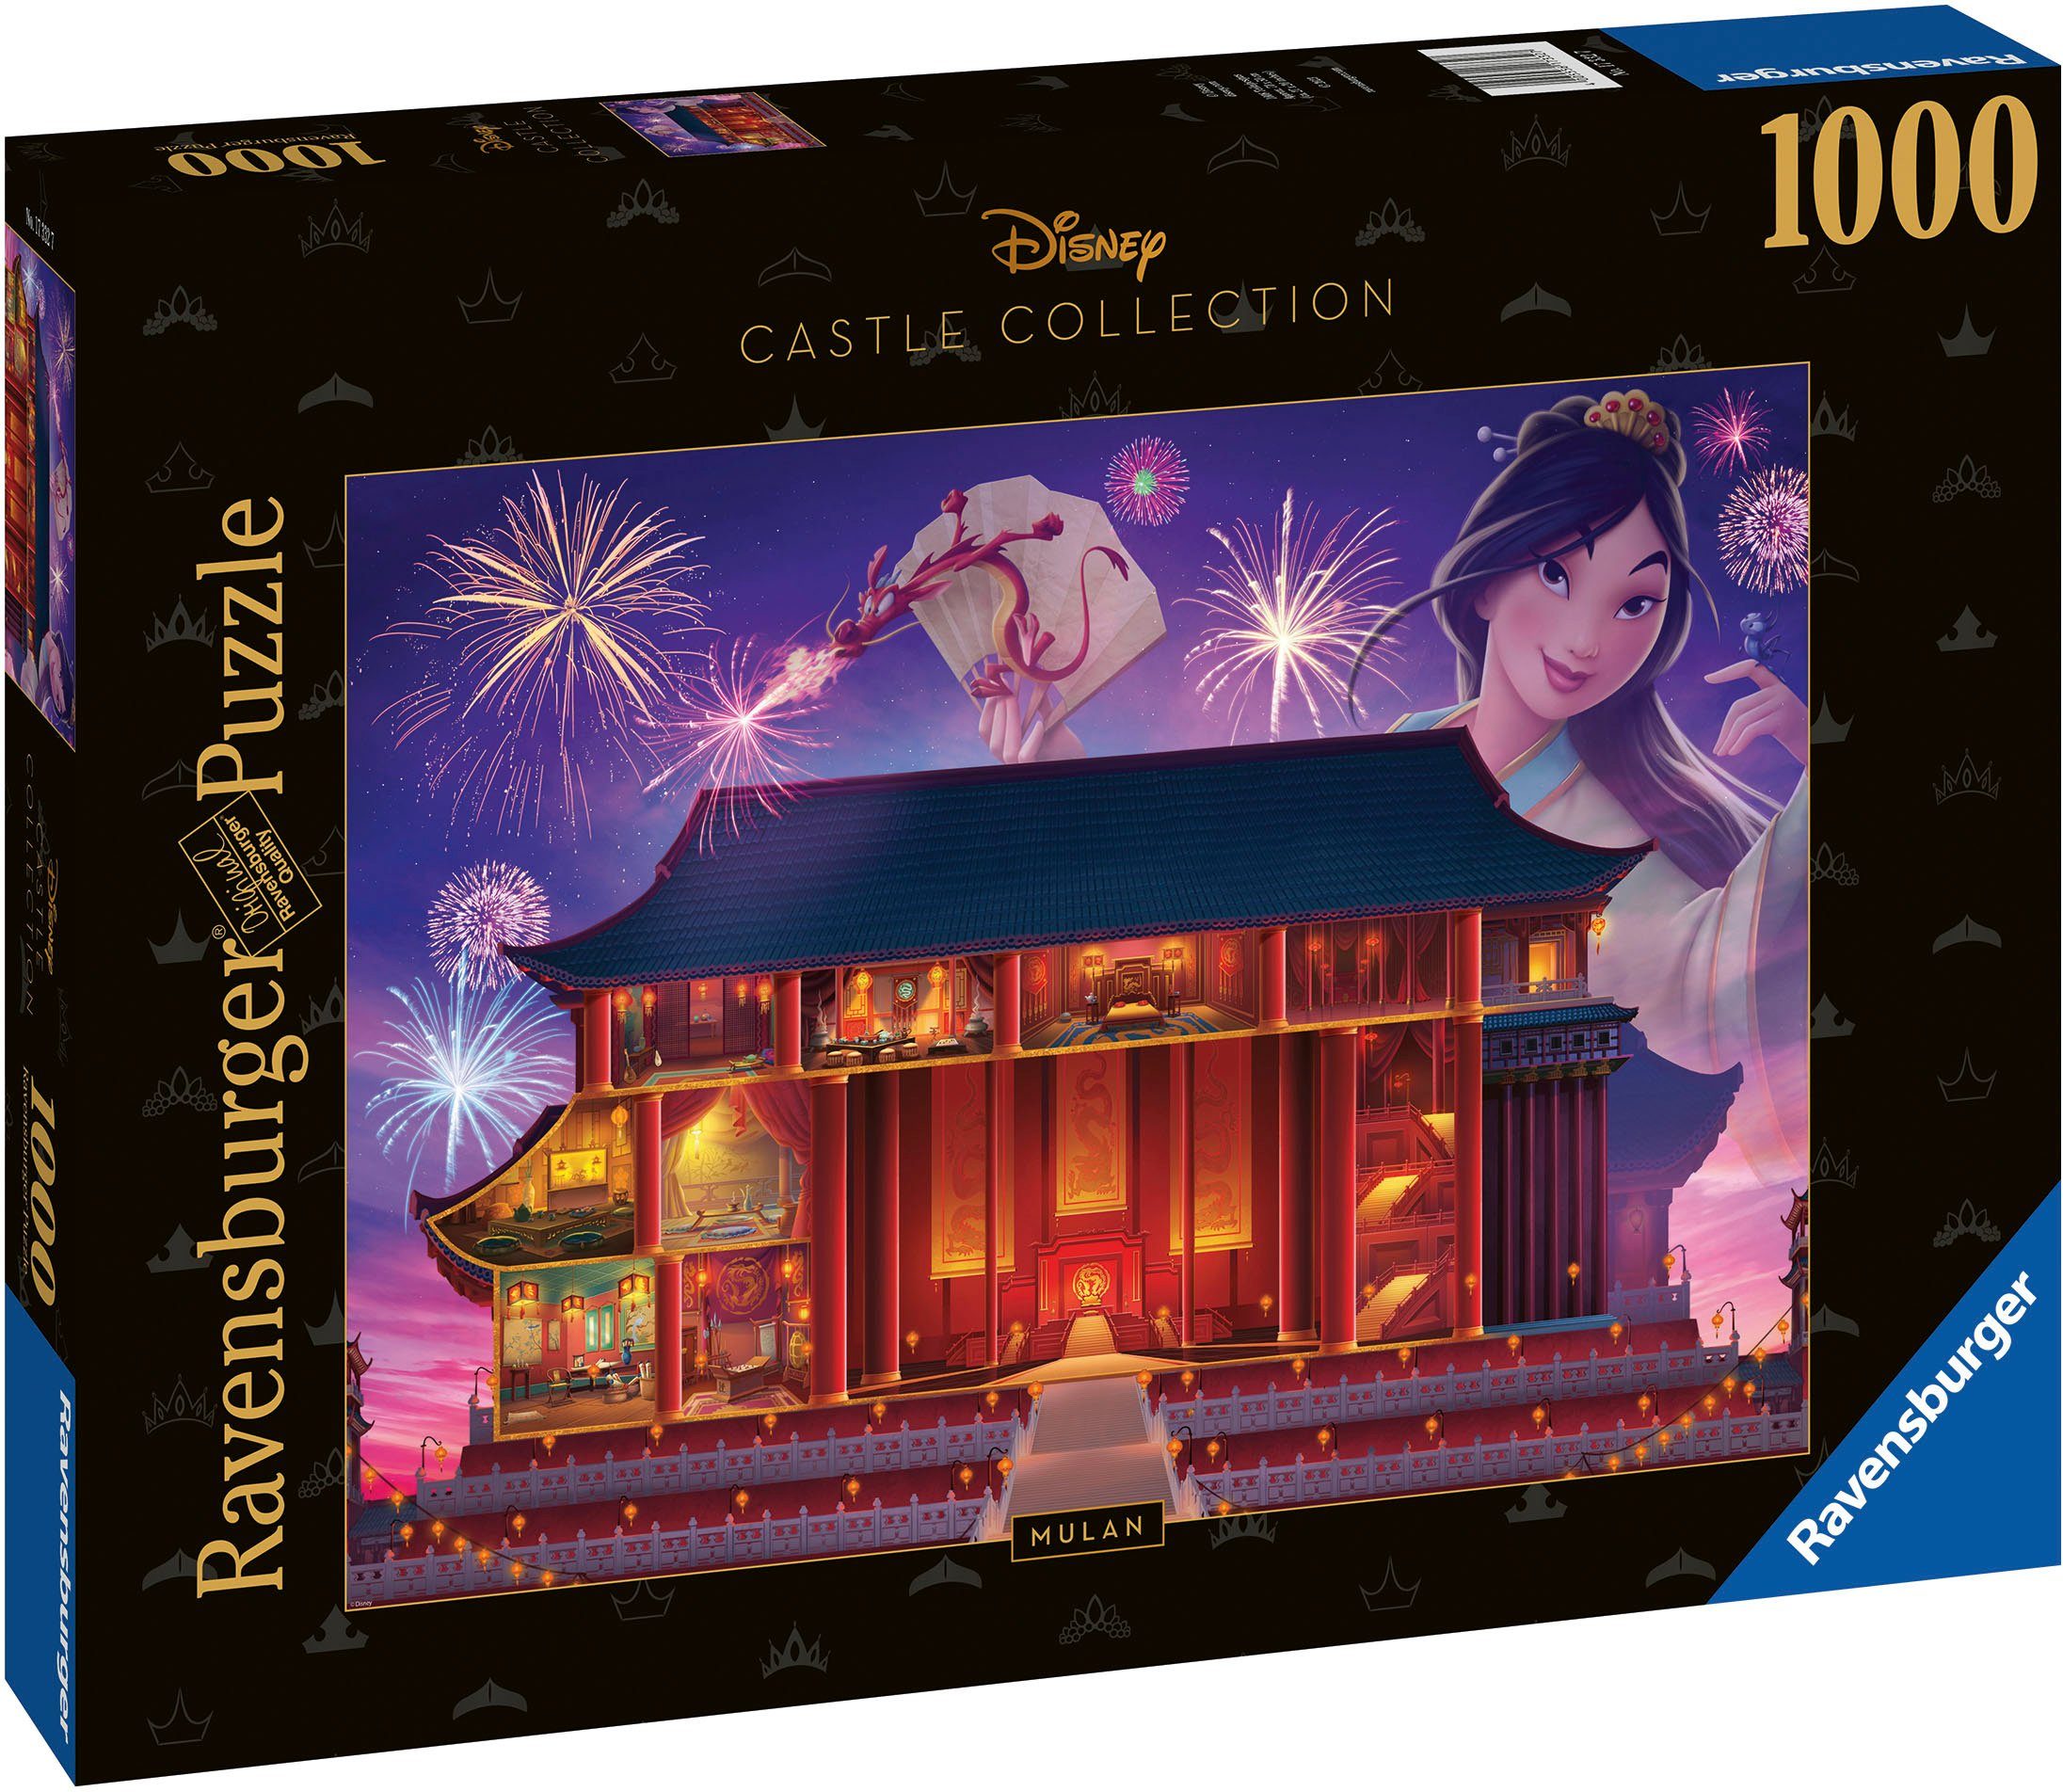 Puzzleteile, Collection, in Disney Puzzle Ravensburger Germany Made Castle 1000 Mulan,